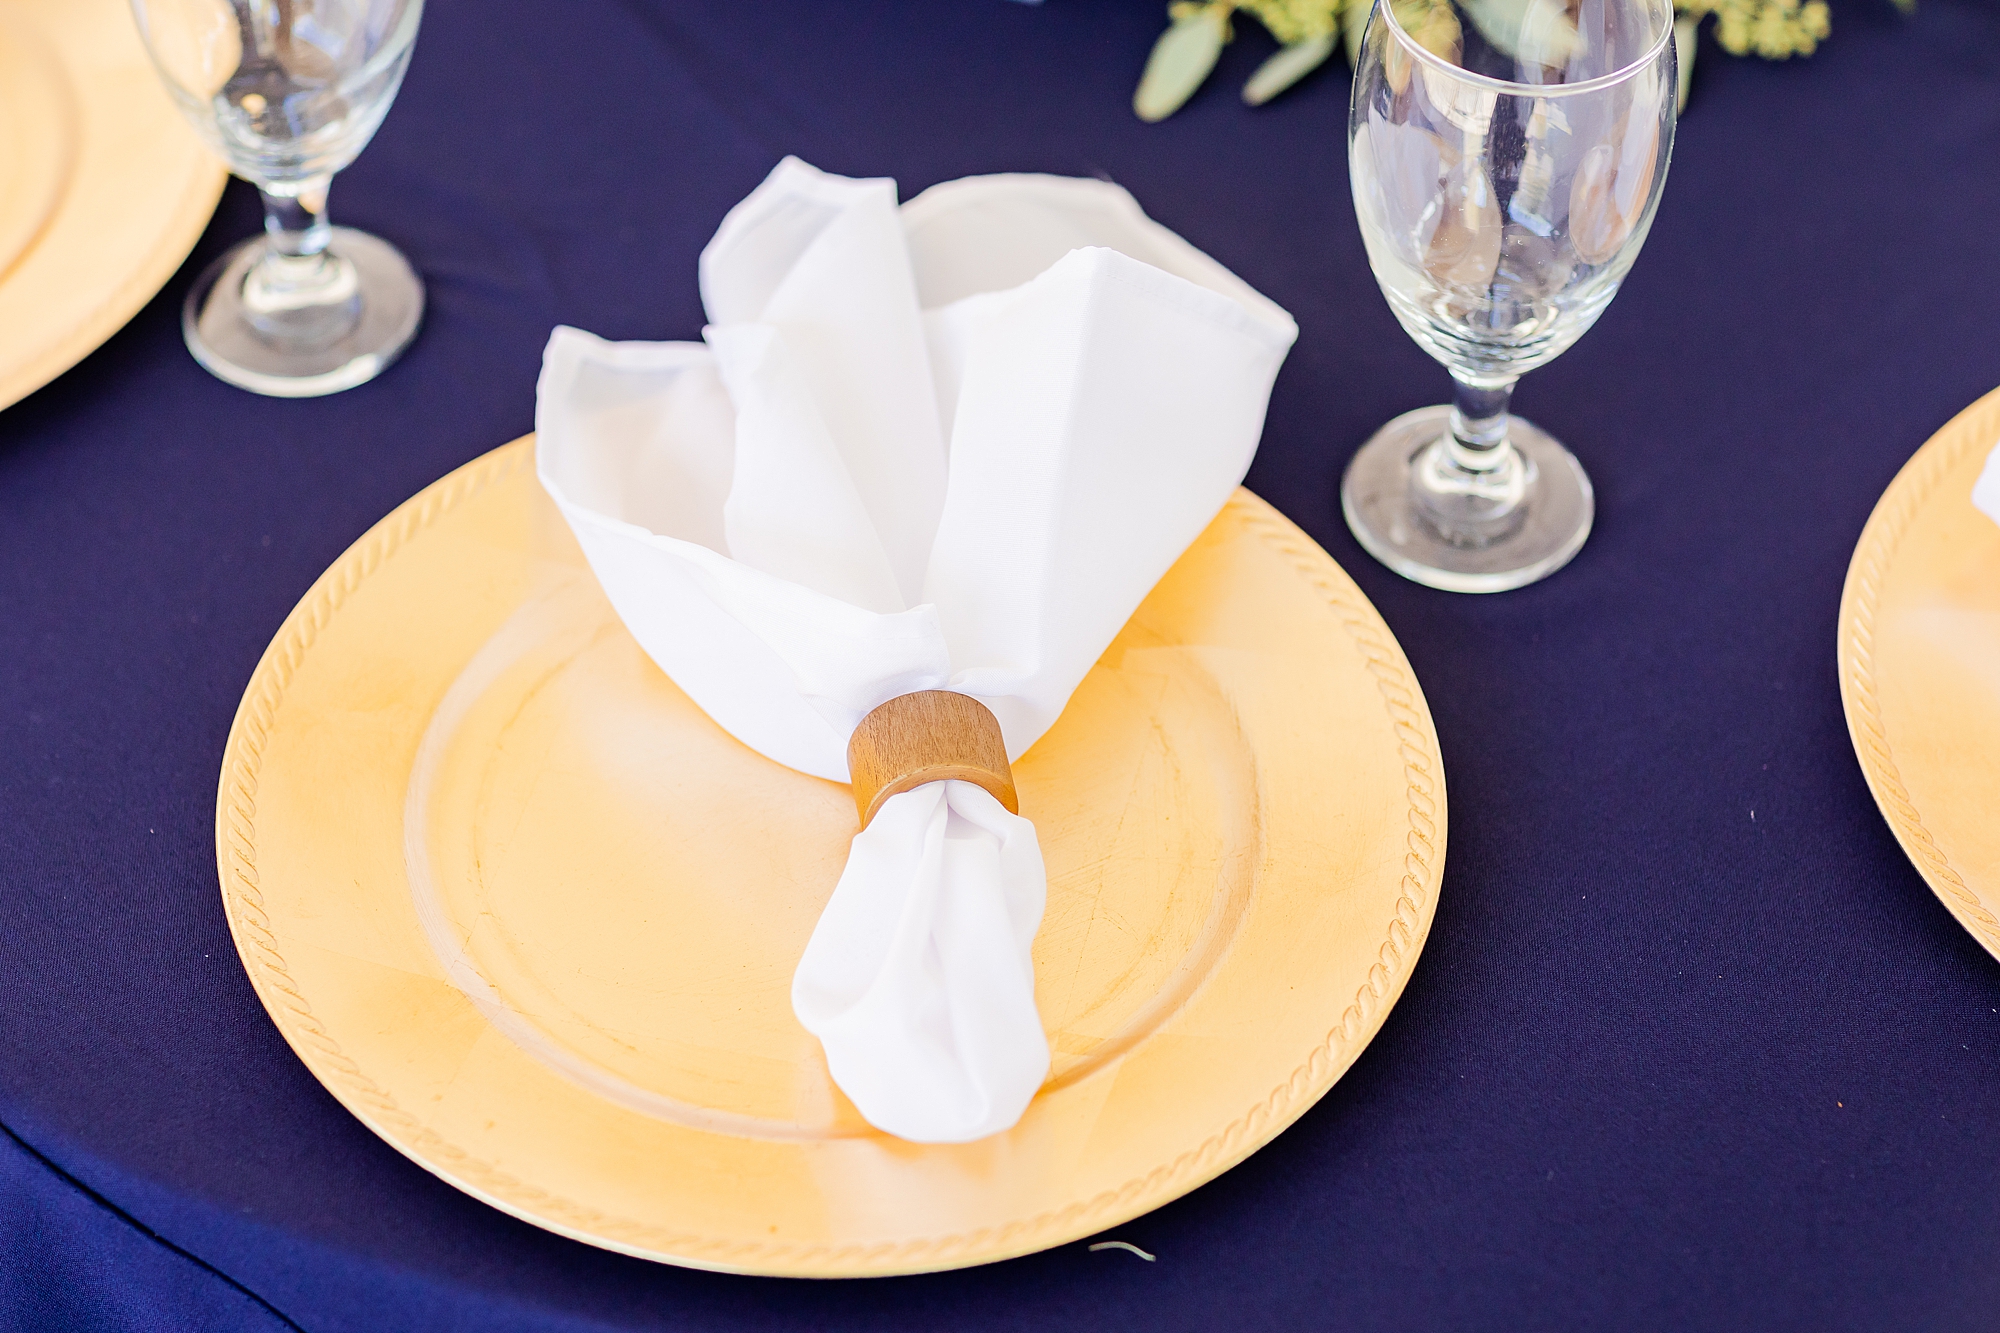 gold chargers and napkins with gold ring